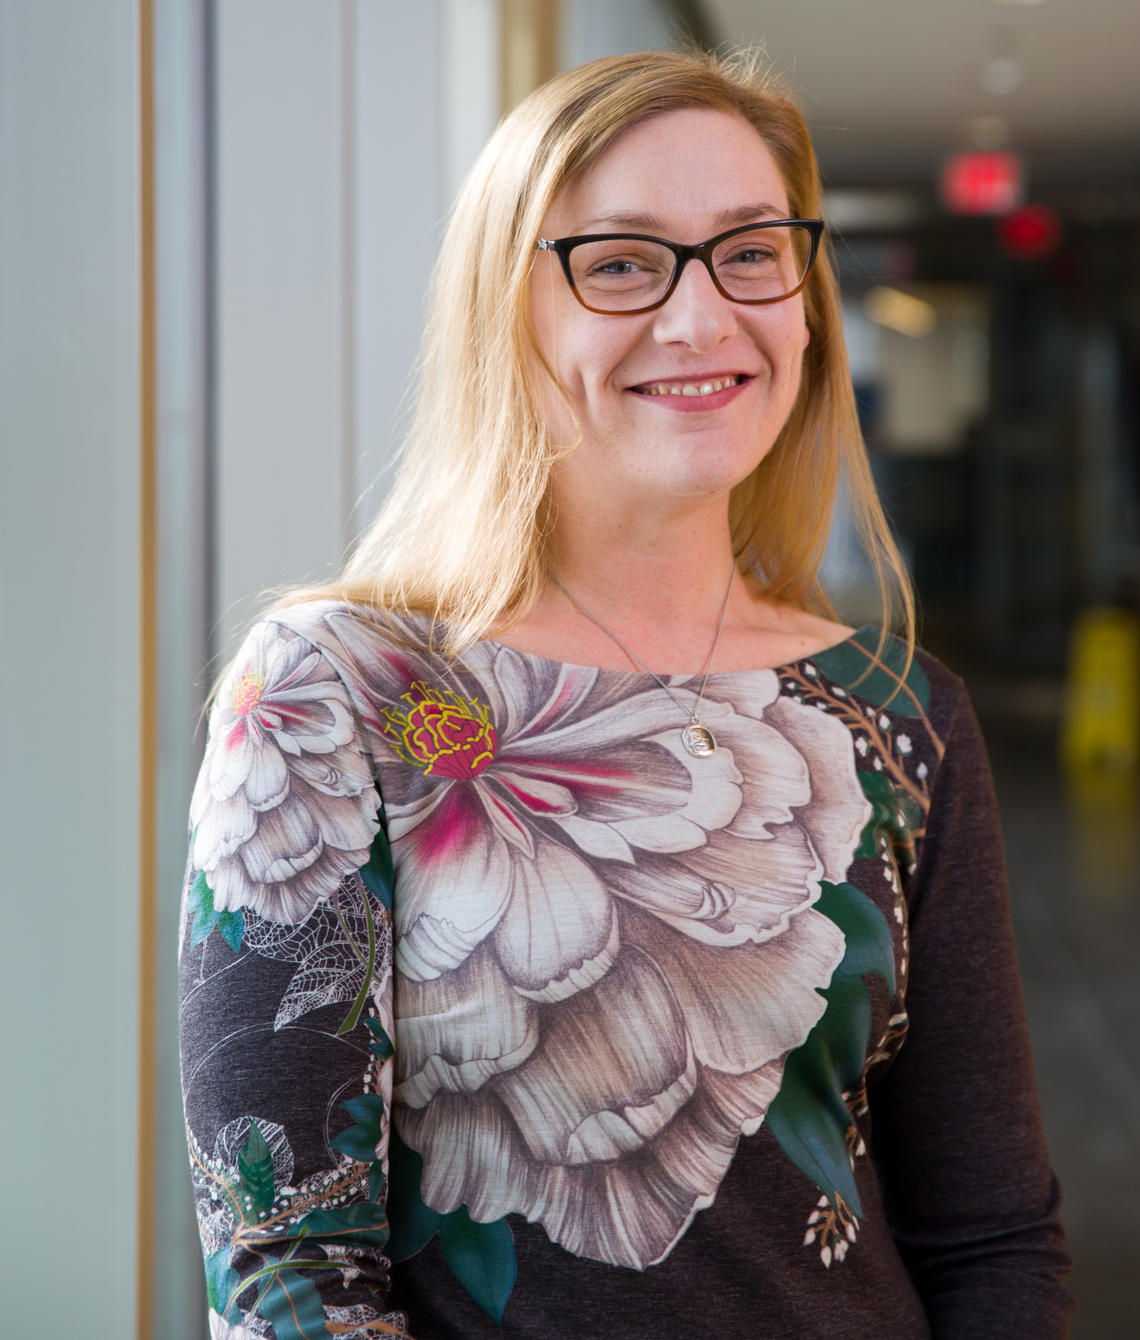 Liz Scarratt leads a team of 15 administrators who help University of Calgary researchers get the funding they need to do groundbreaking work.